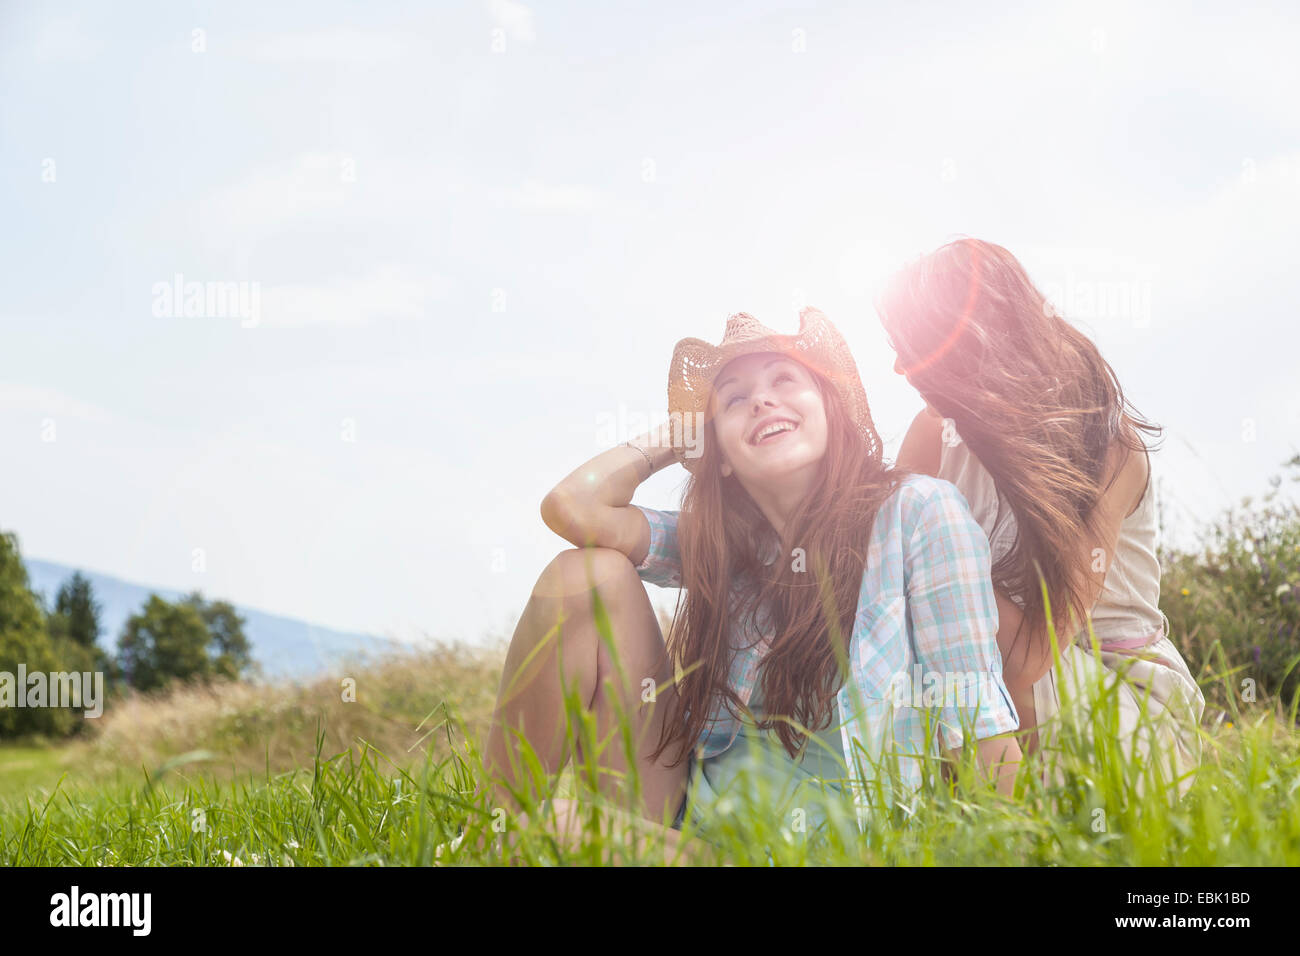 Two young women sitting chatting in grassy field Stock Photo